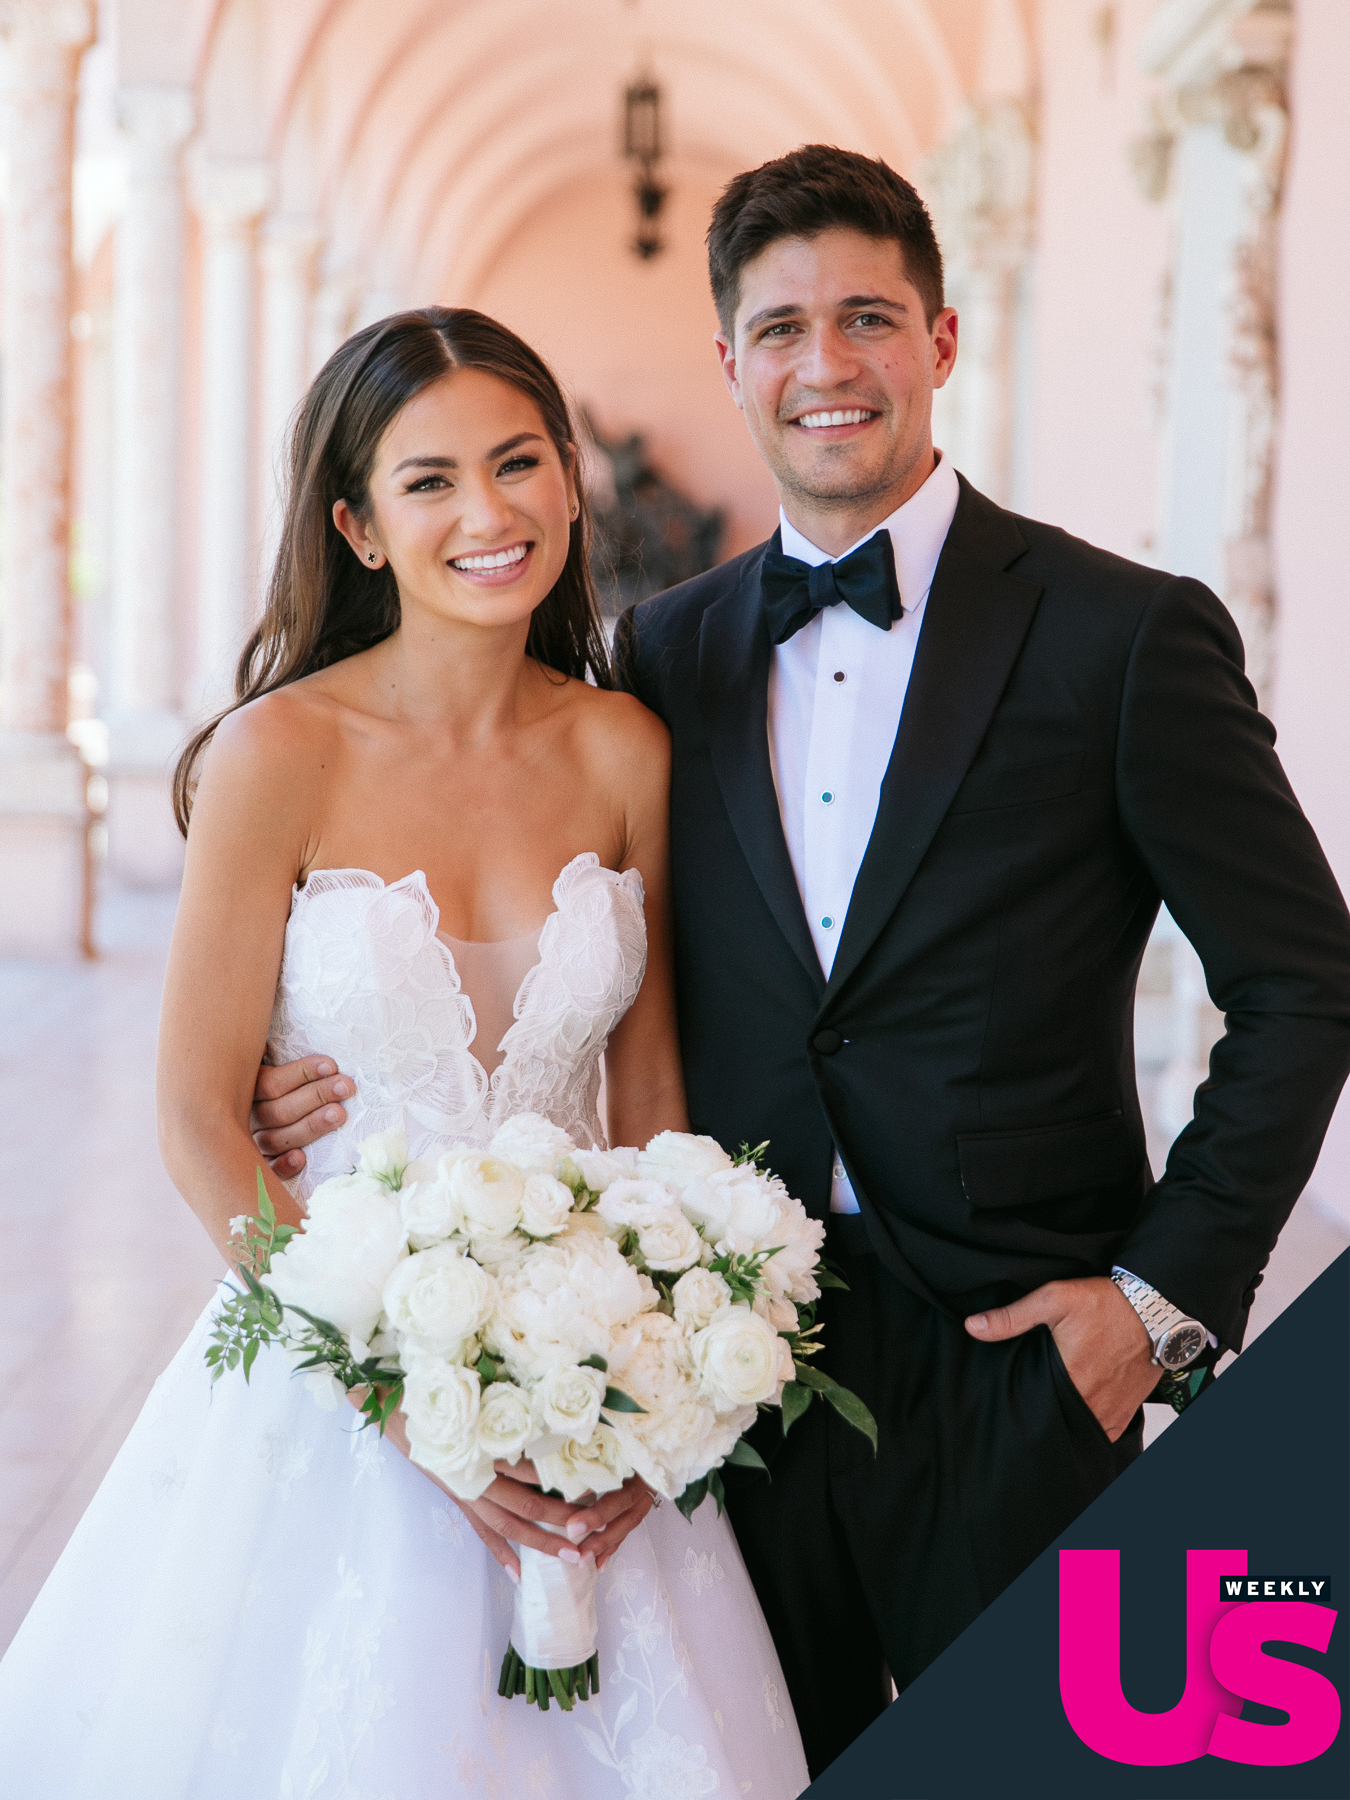 Bachelor's Caila Quinn Marries Nick Burrello in Waterfront Ceremony: See the Photos